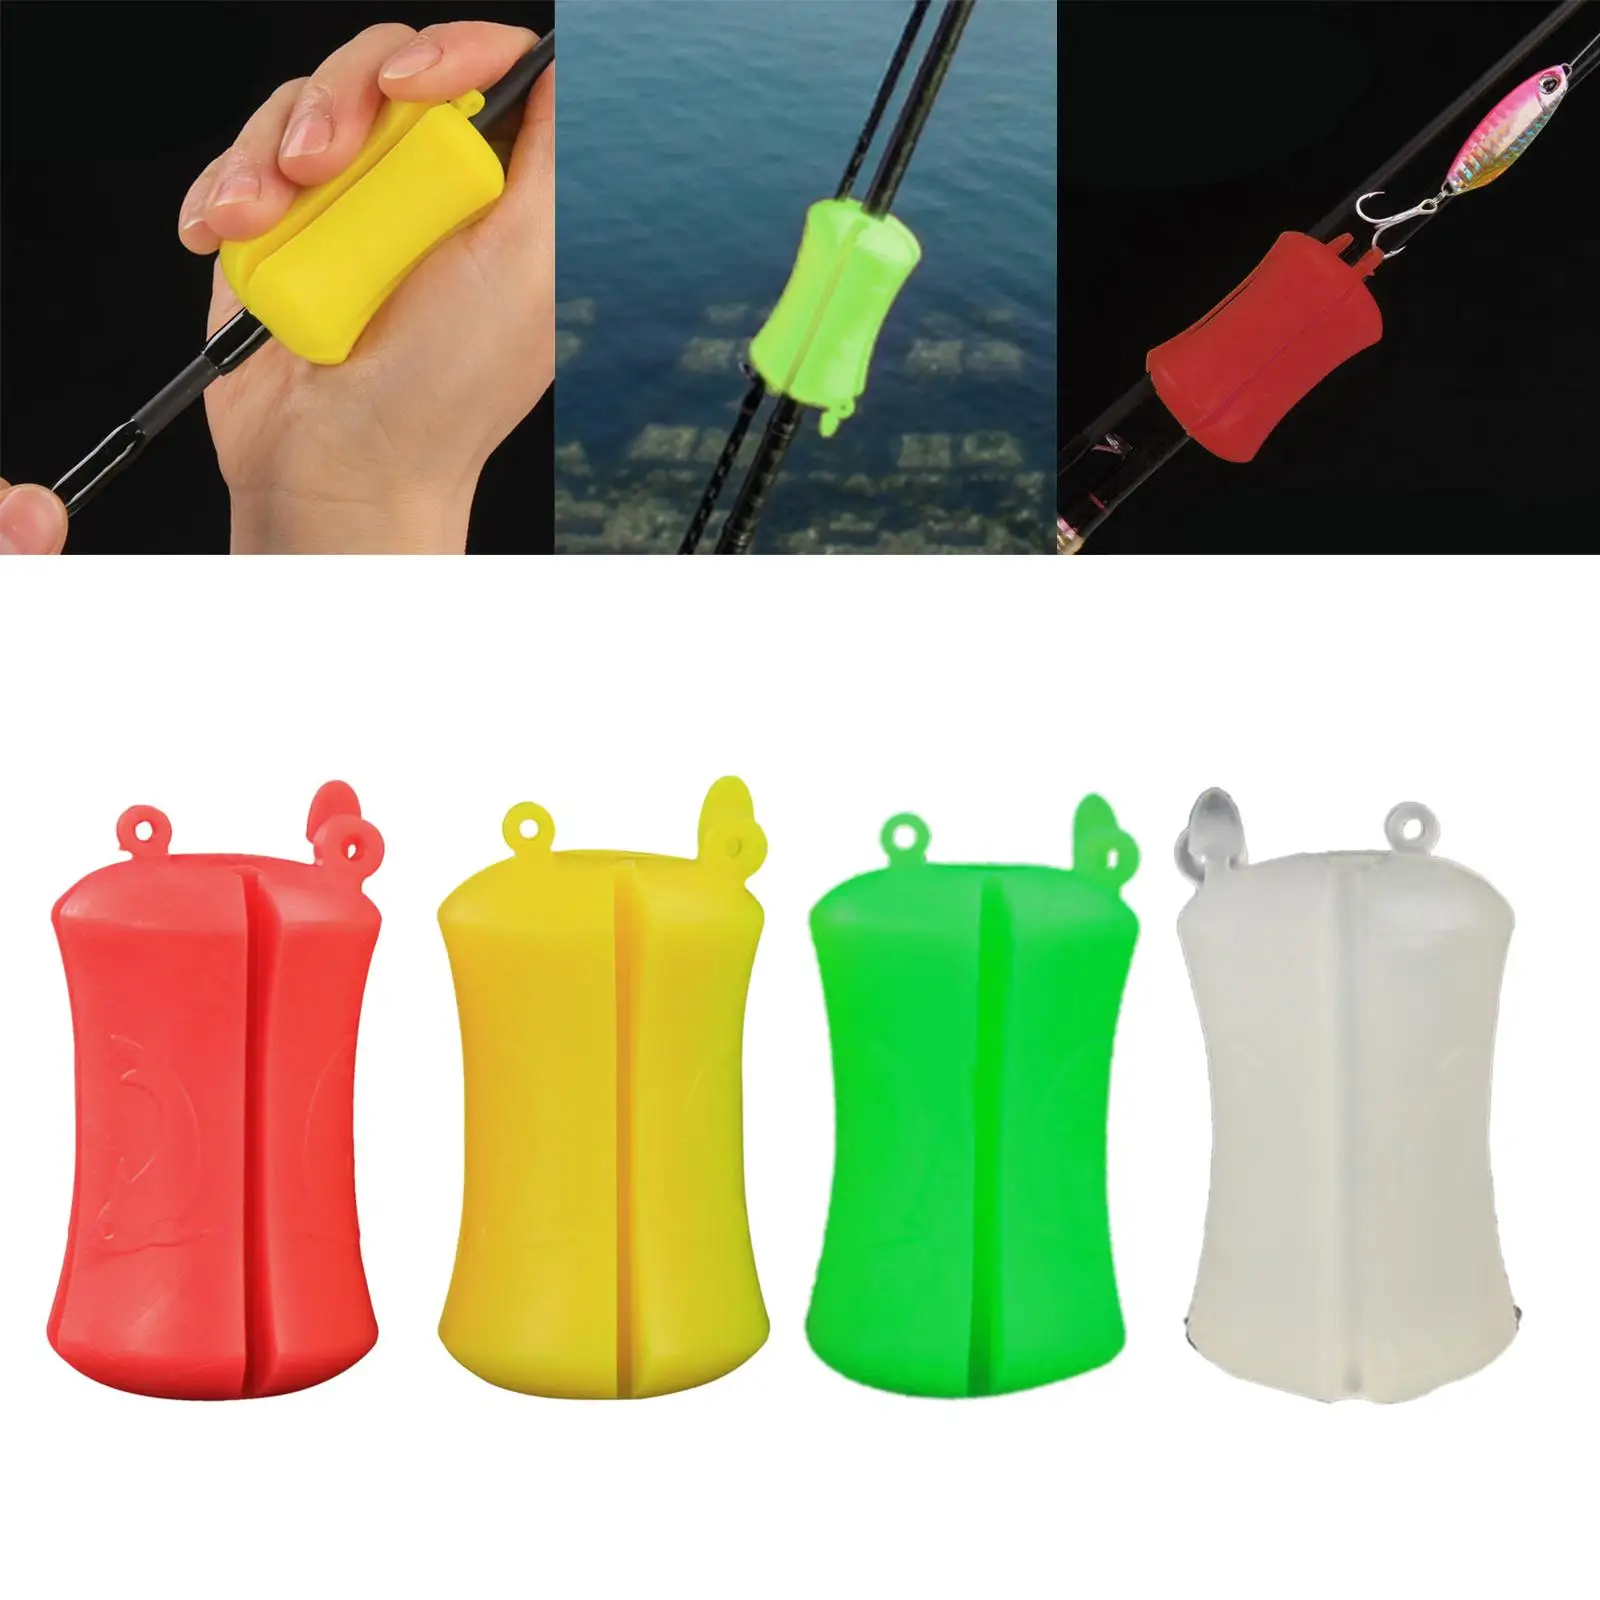 

4x Fishing Rod Fixed Ball Pole Clip Comfortable Elastic 1 Set for Supplies